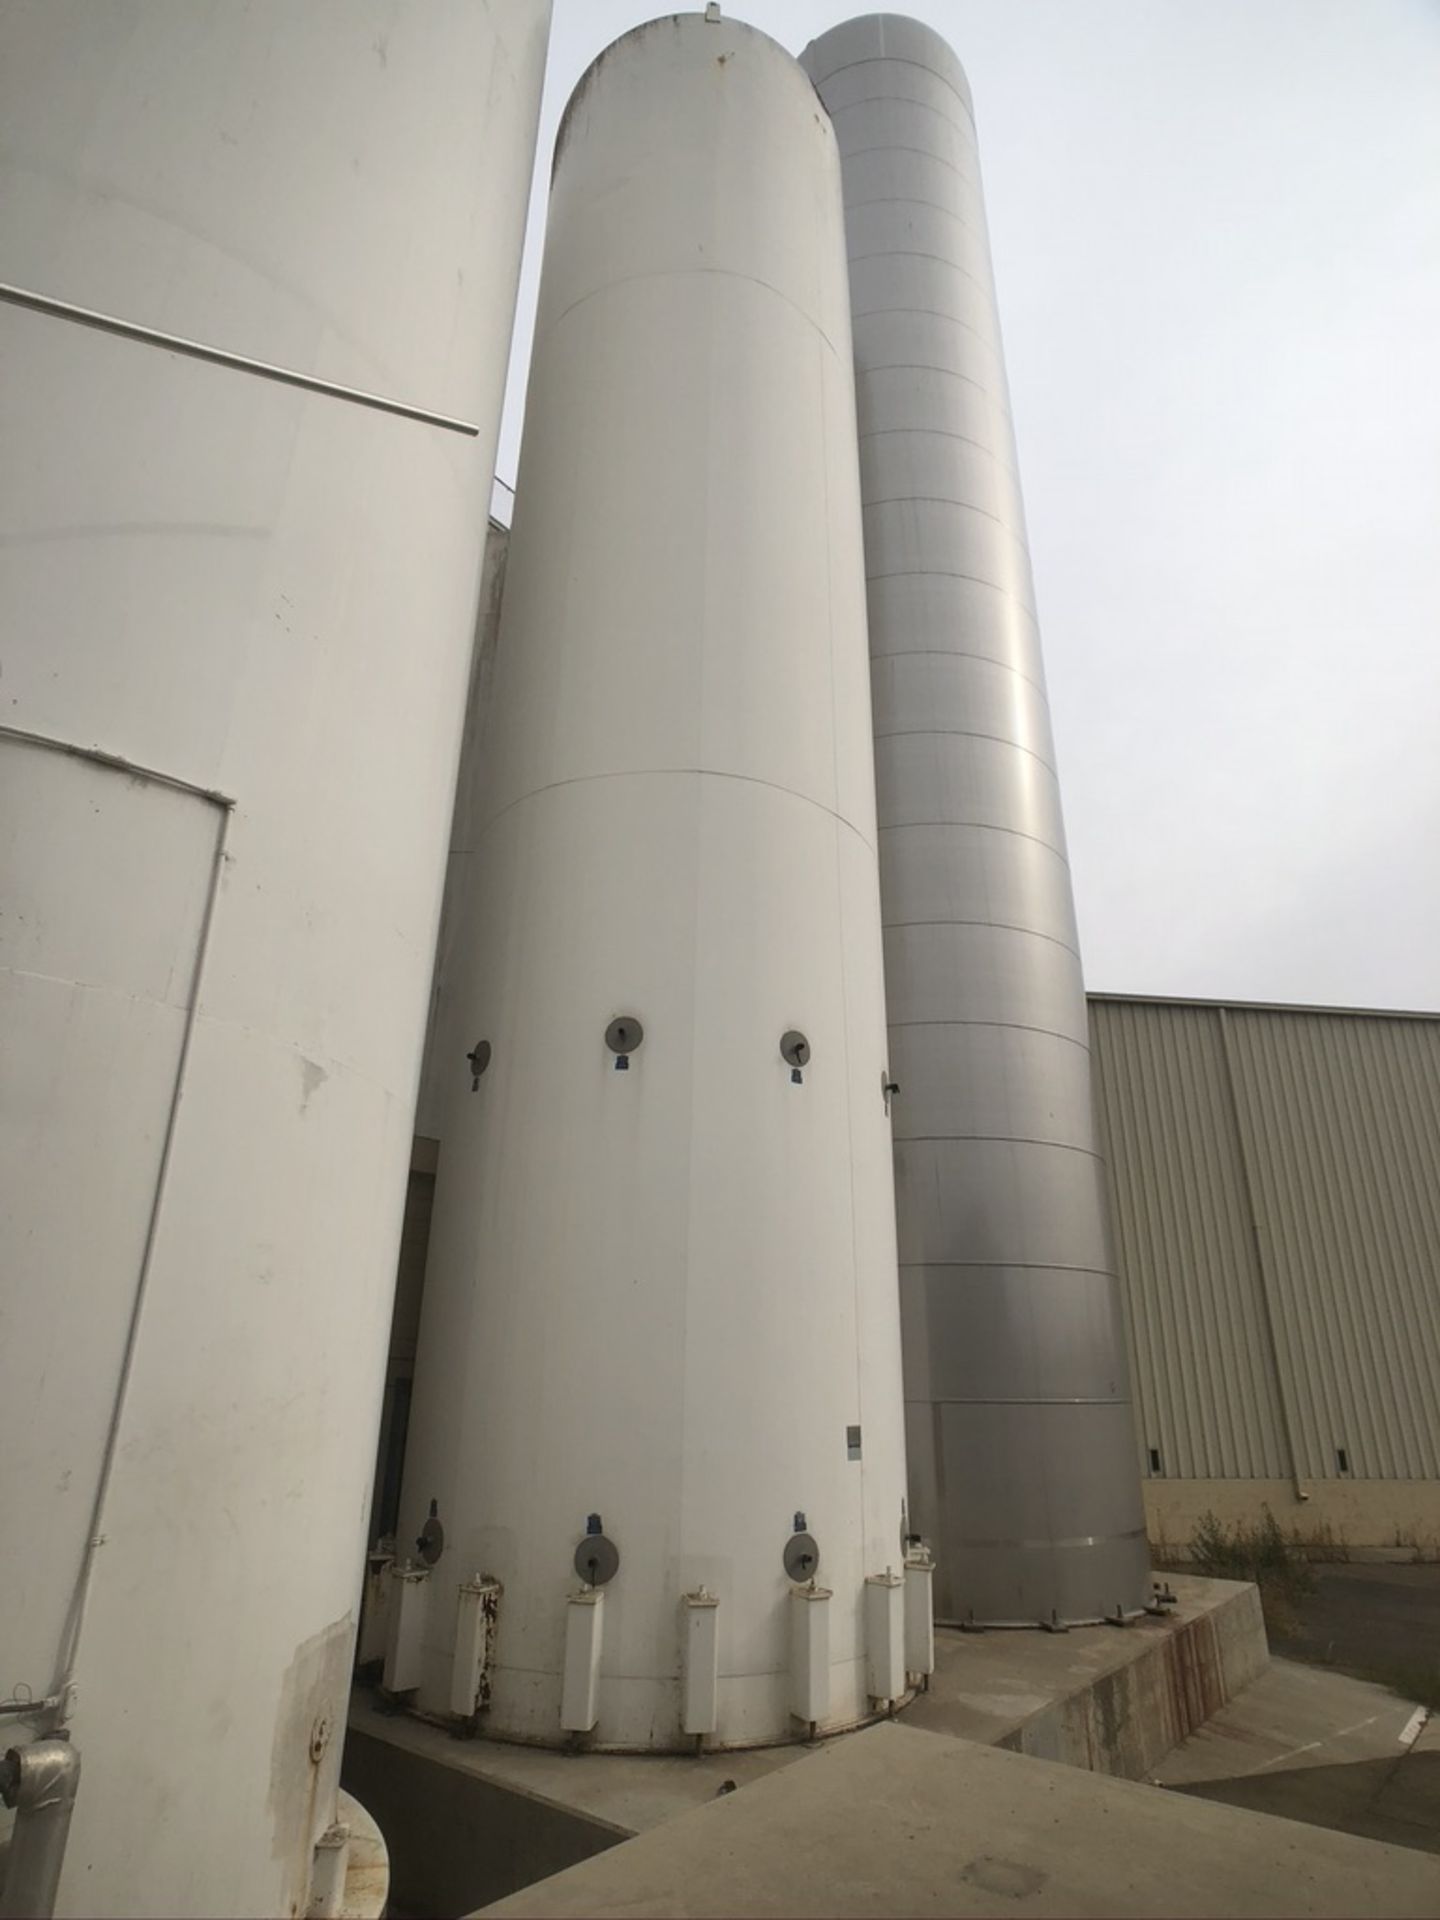 MUELLER 40,000 GALLON JACKETED SILO , S/N 324951-1 - Image 2 of 36